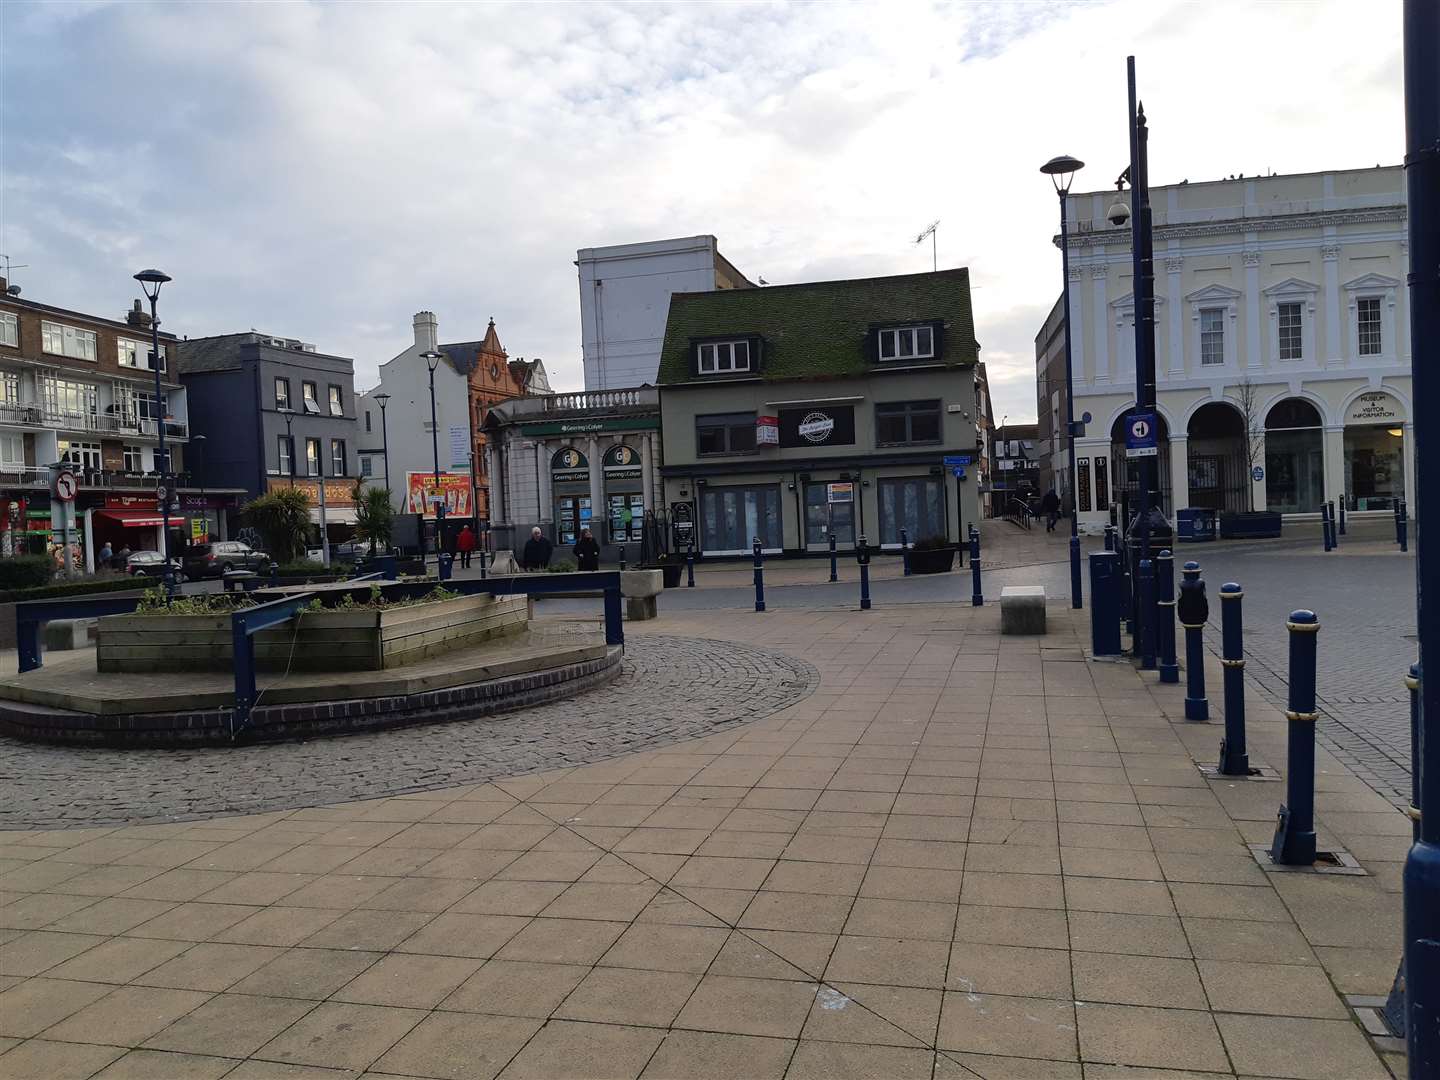 Market Square, Dover will be an attractive link between St James and the Old Town of Cannon Street, Biggin Street and the High Street